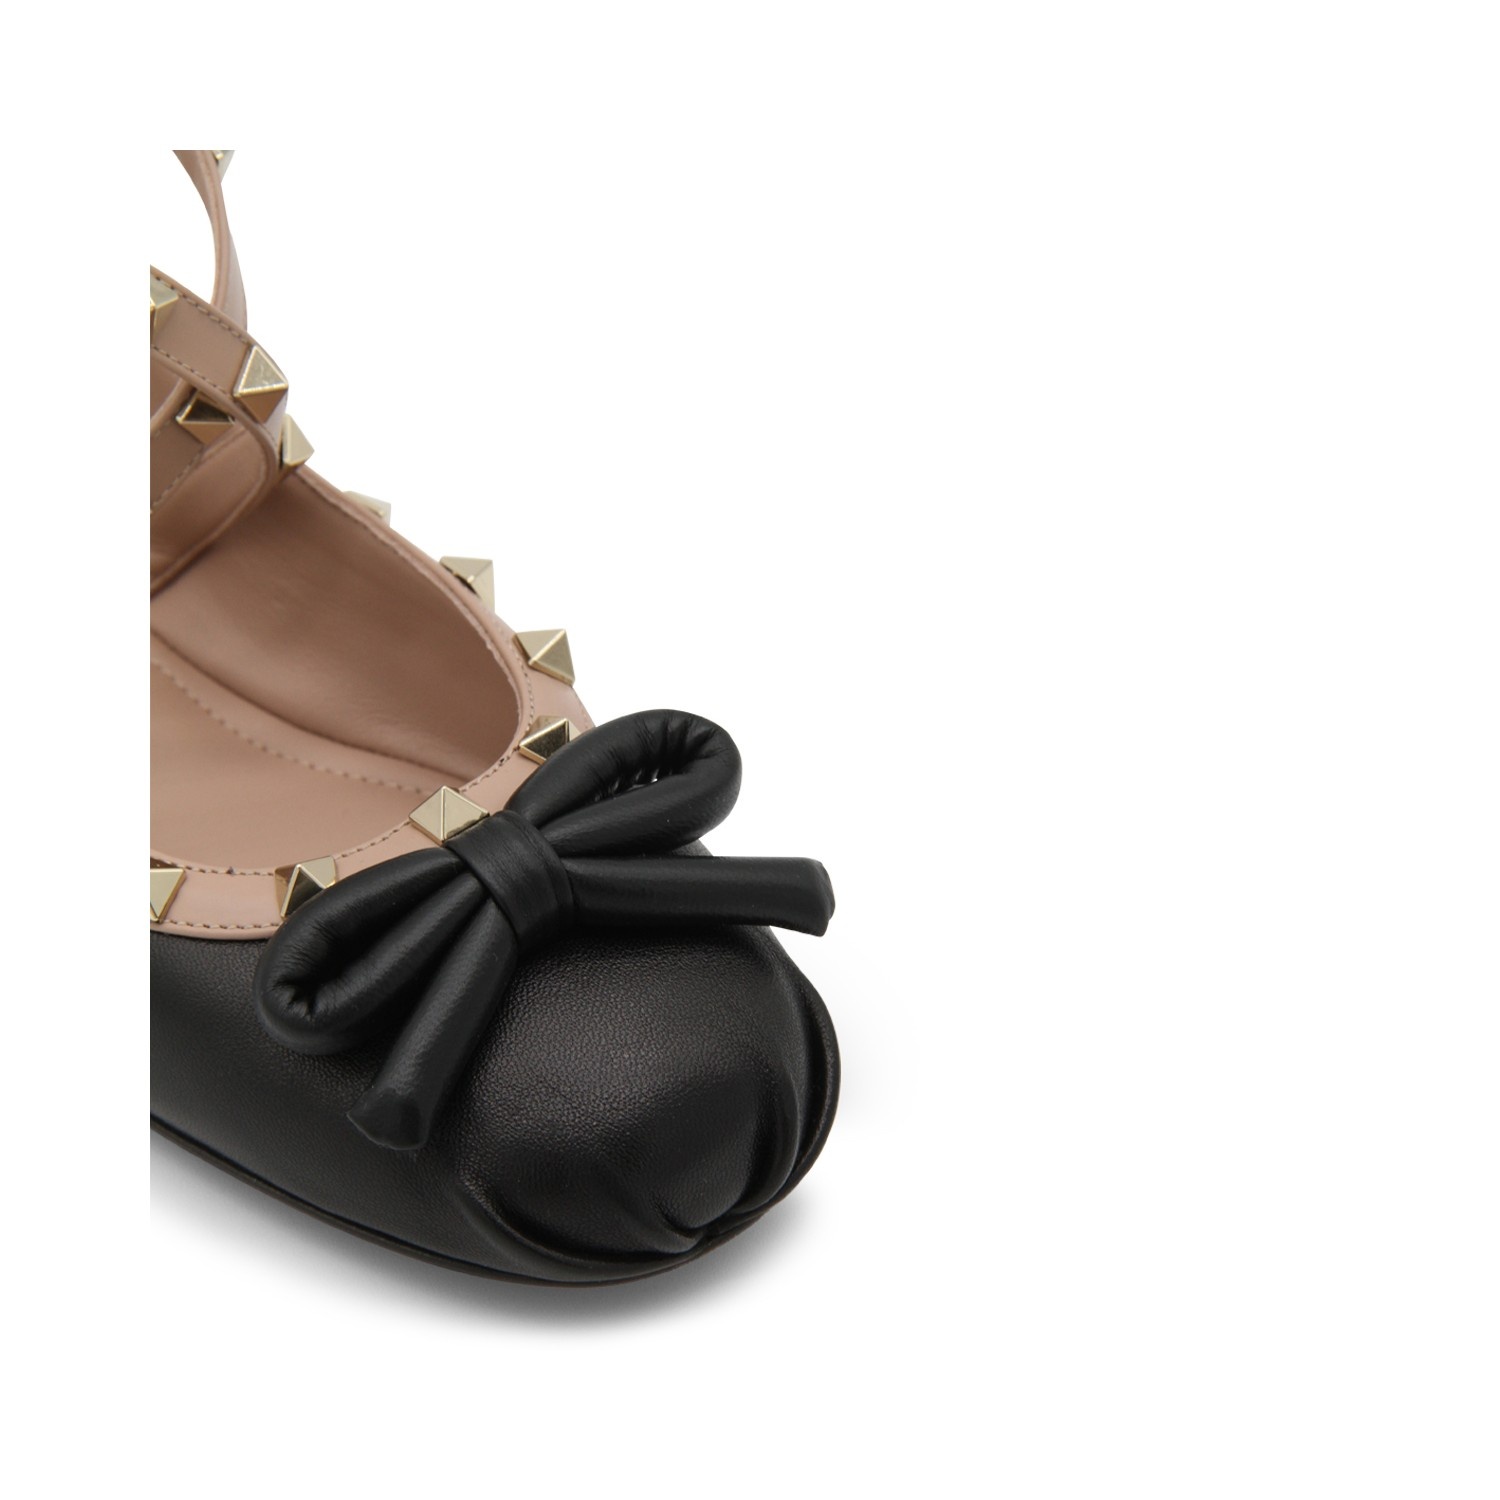 BLACK AND POUDRE PINK LEATHER BALLERINA SHOES - 4